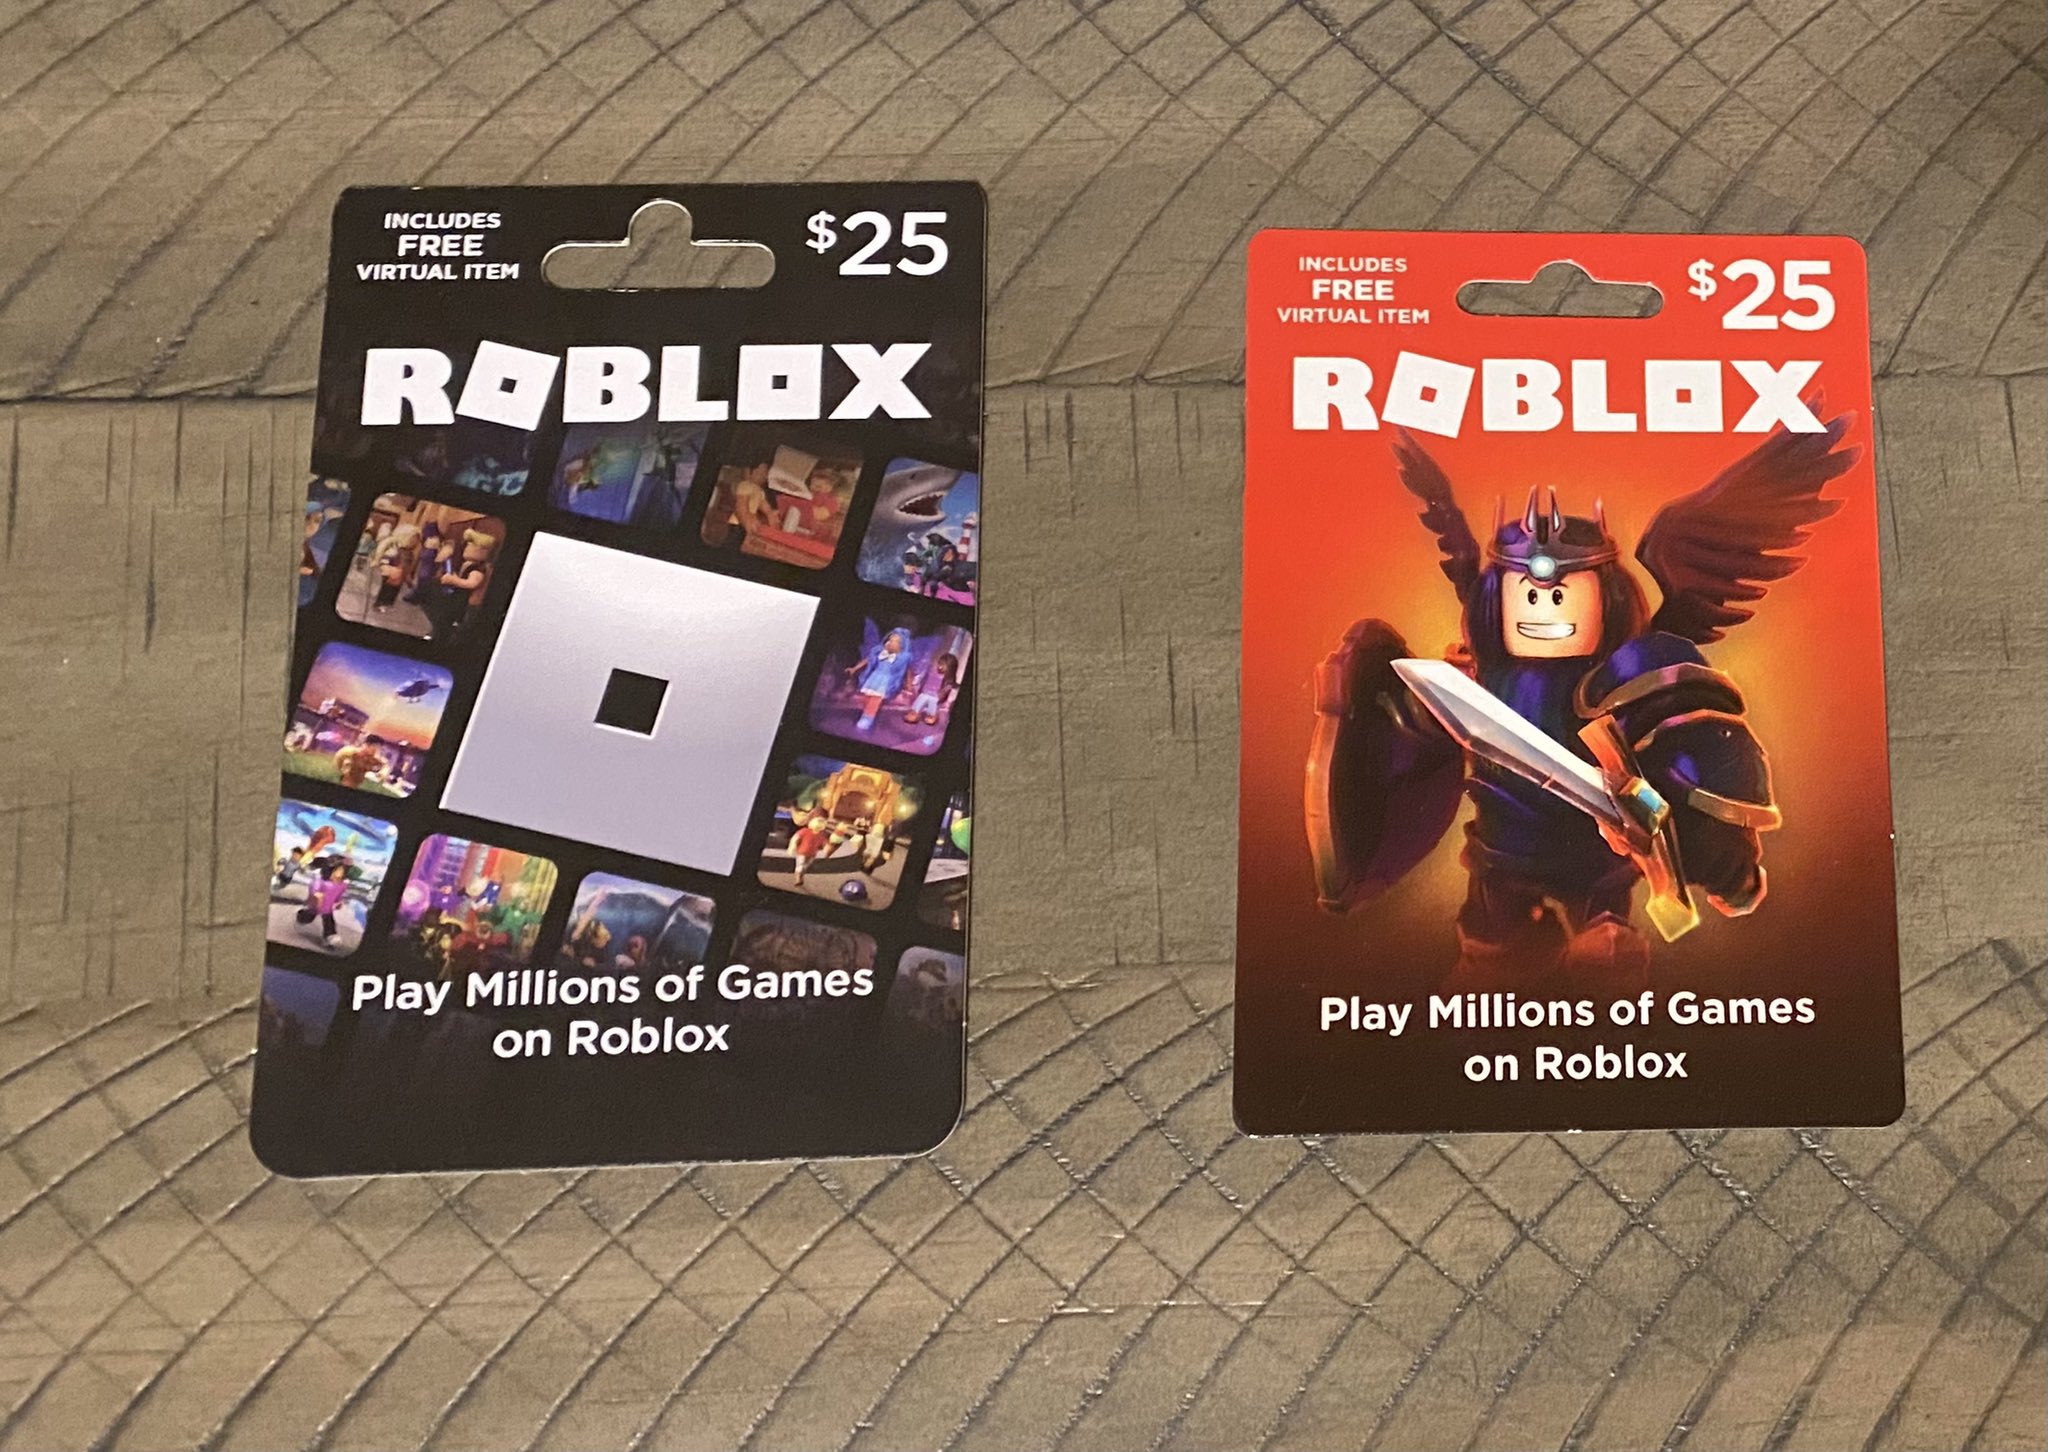 Model8197 on X: Anyone want a Robux Gift Card? I have a few left